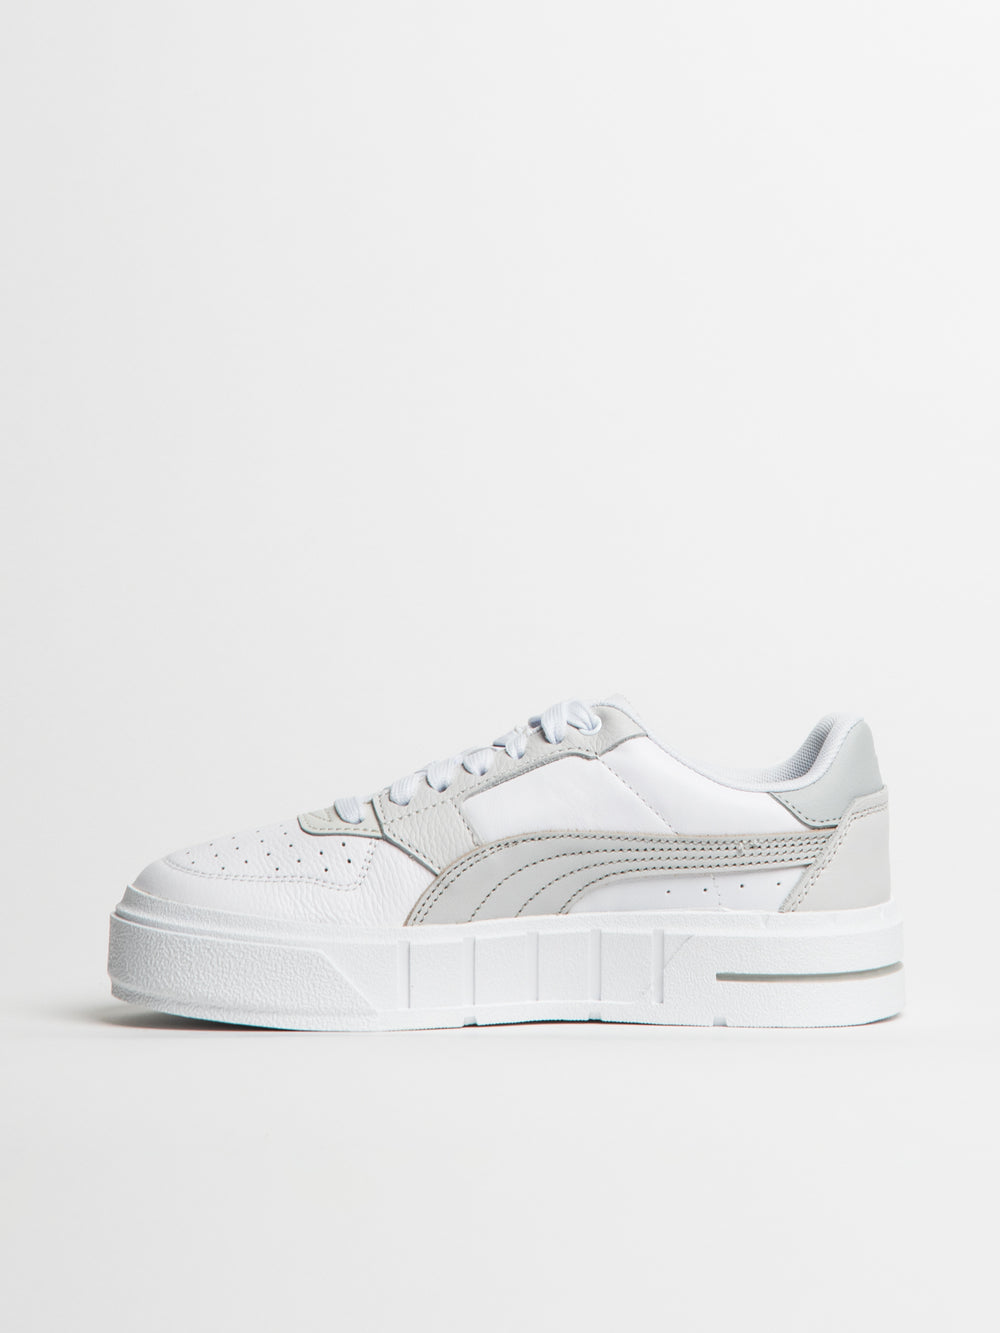 WOMENS PUMA CALI COURT LEATHER SNEAKER | Boathouse Footwear Collective